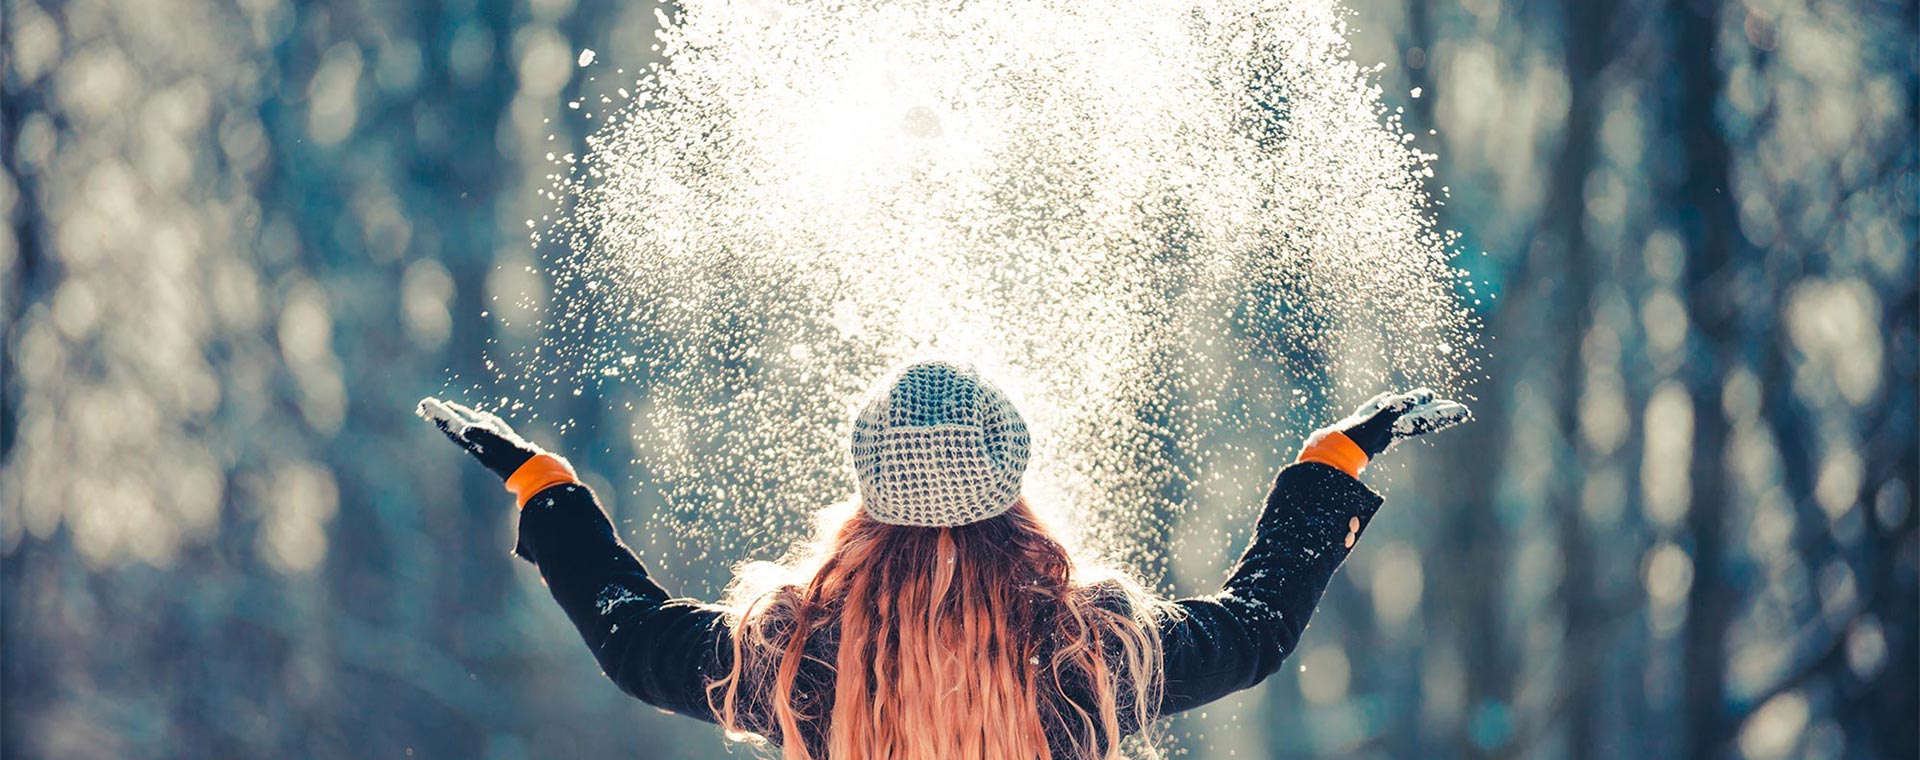 View from behind of a young woman with long, wavy, coral colored hair throwing snow up into the air with the sunlight shining through the snow, in front of trees